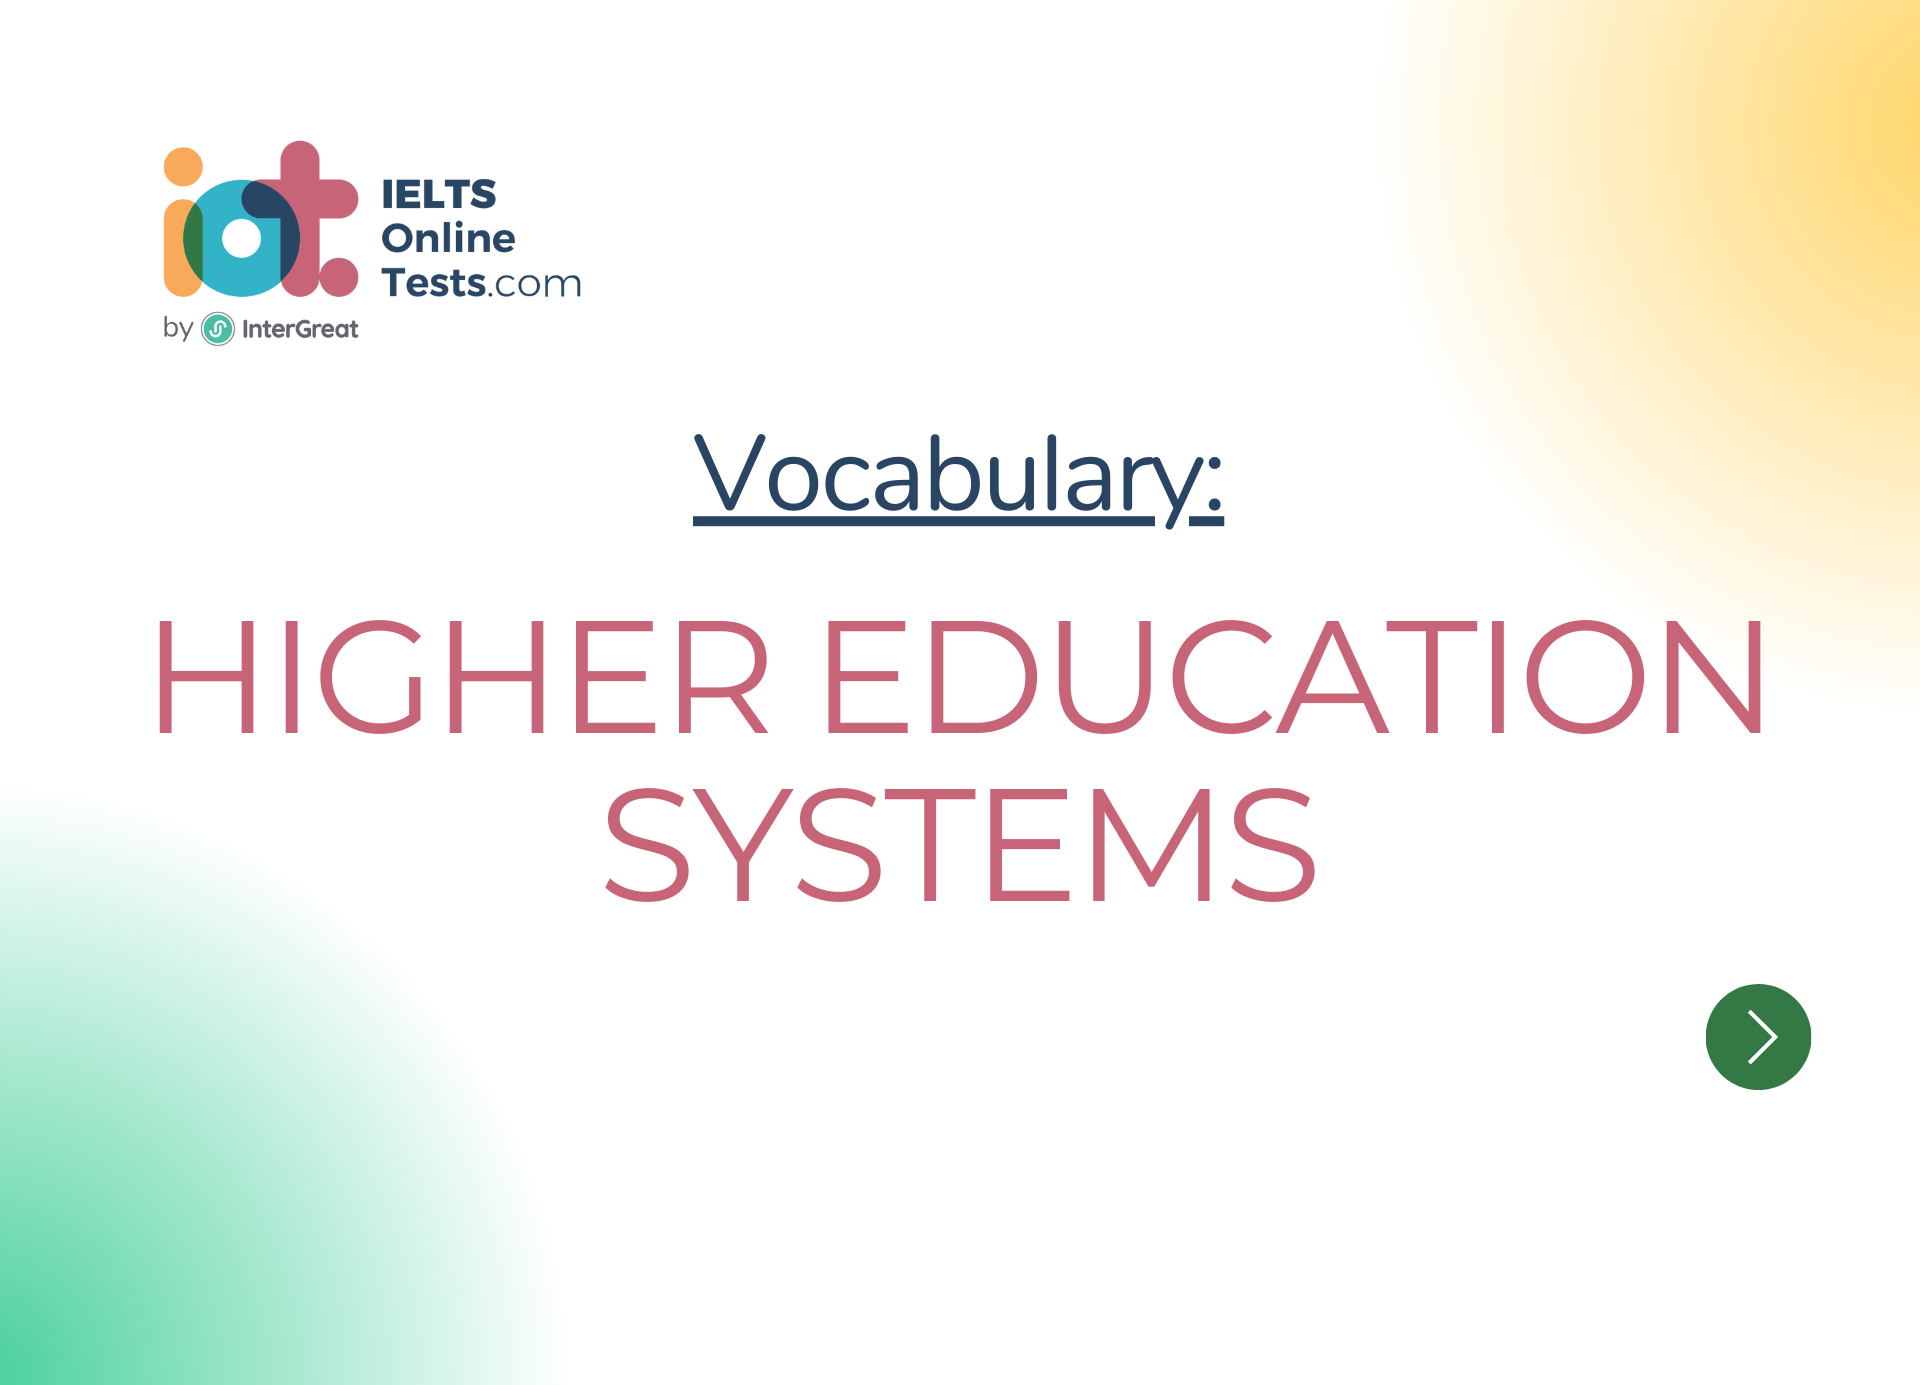 Higher education systems